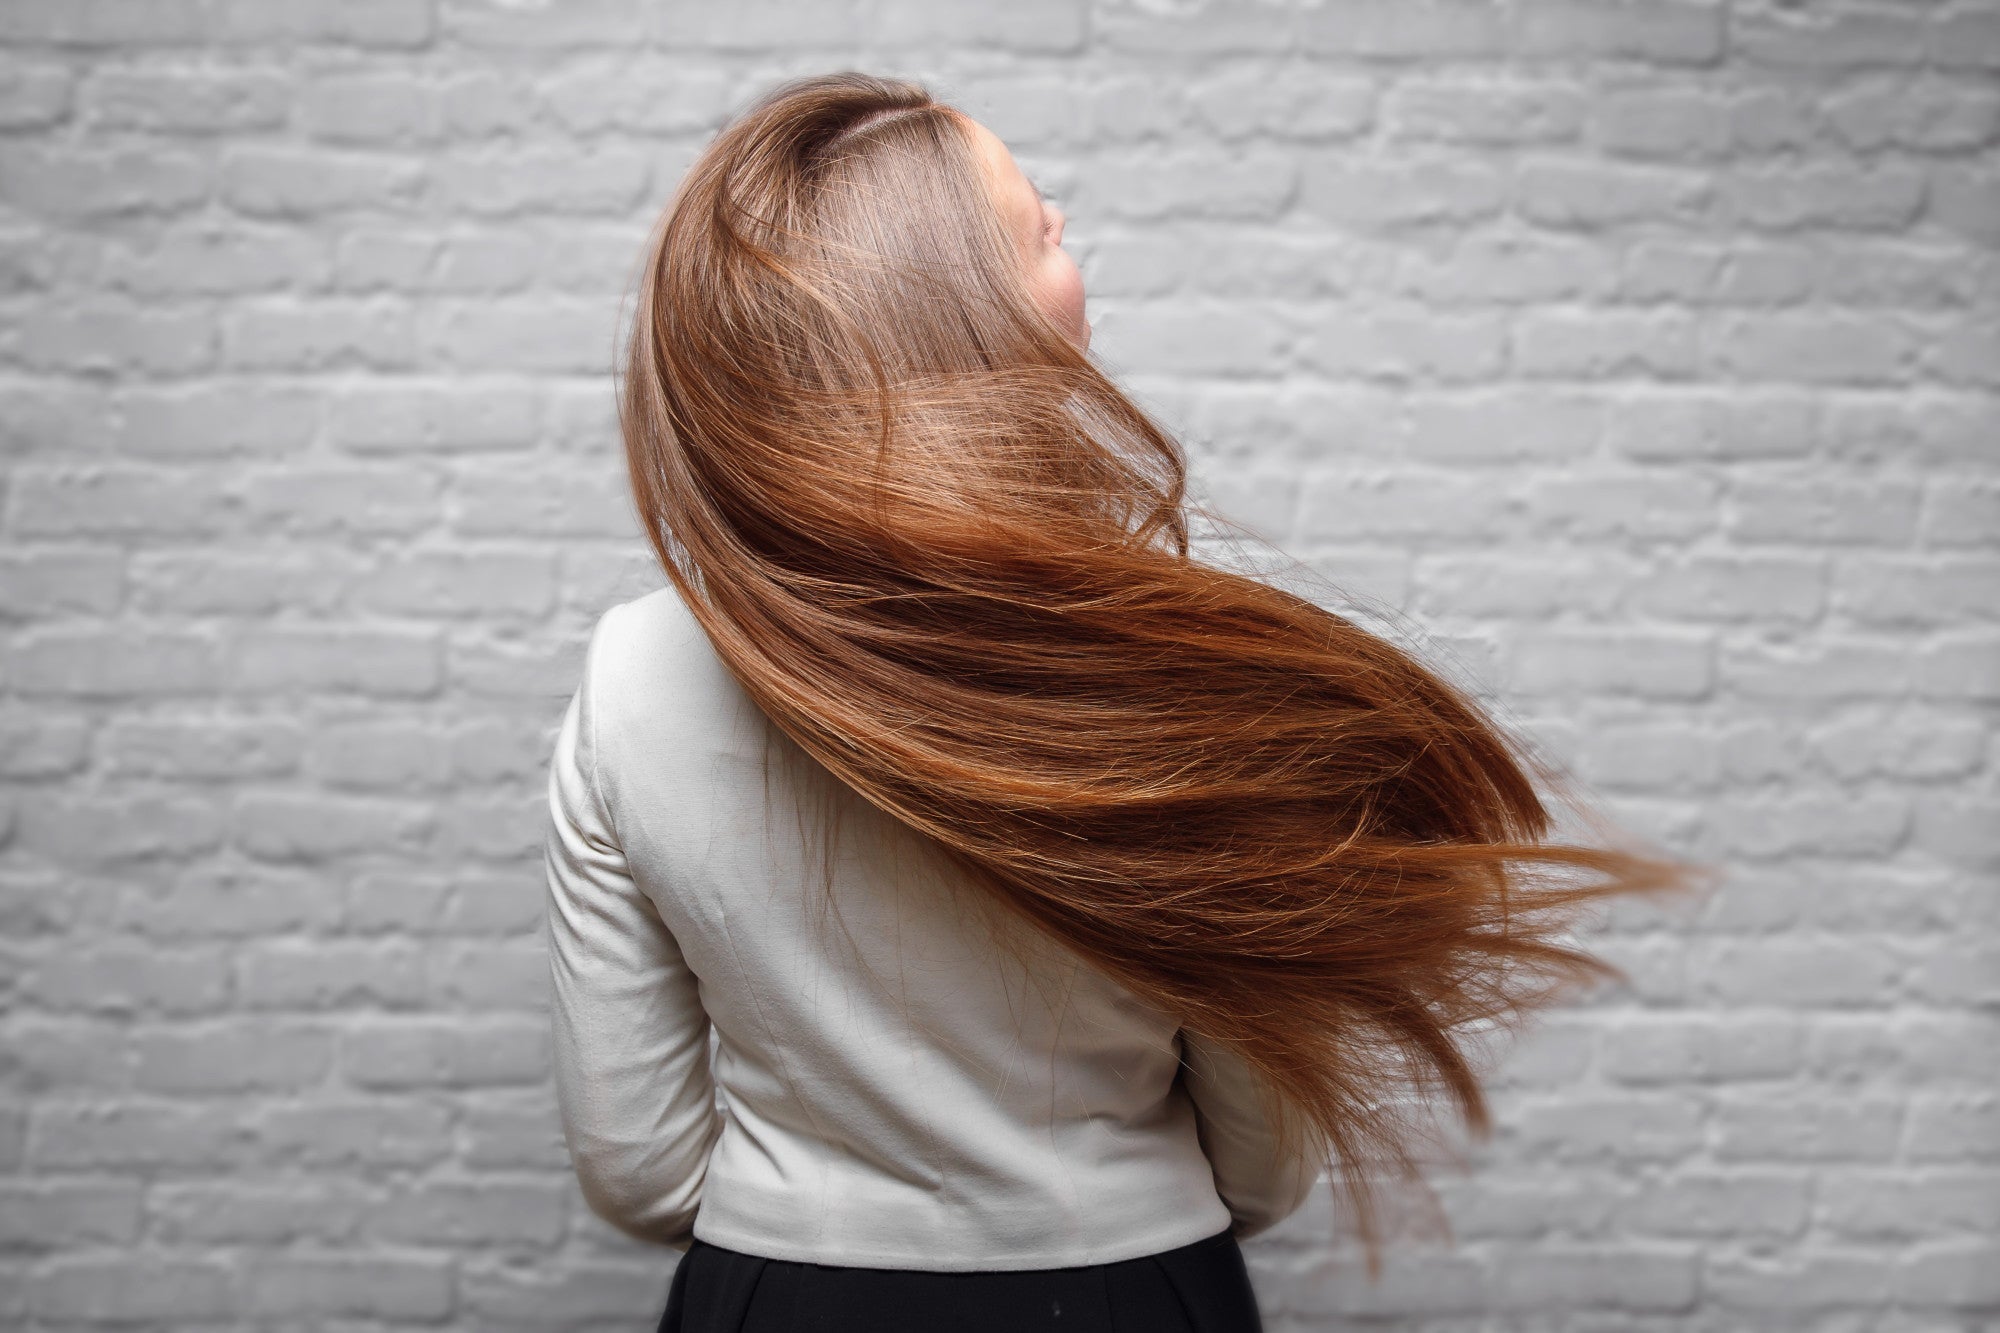 From Drab to Fab: 4 Ways a Dryer Brush Will Transform Your Hair